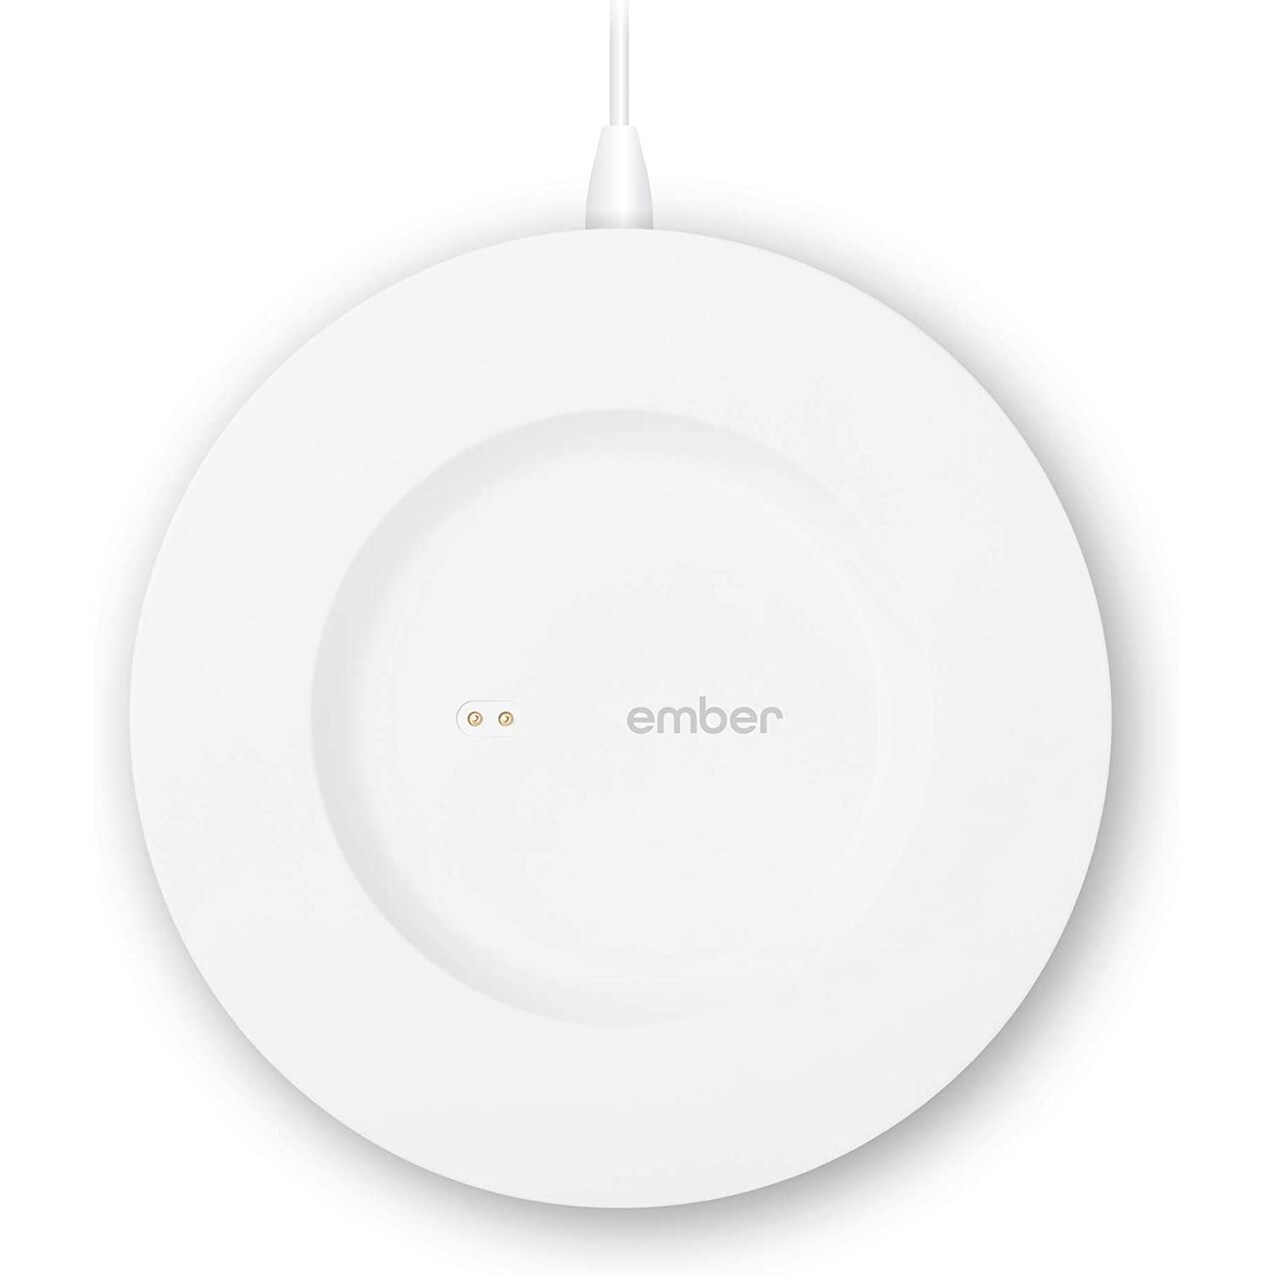 Ember Charging Coaster 2 - Stainless